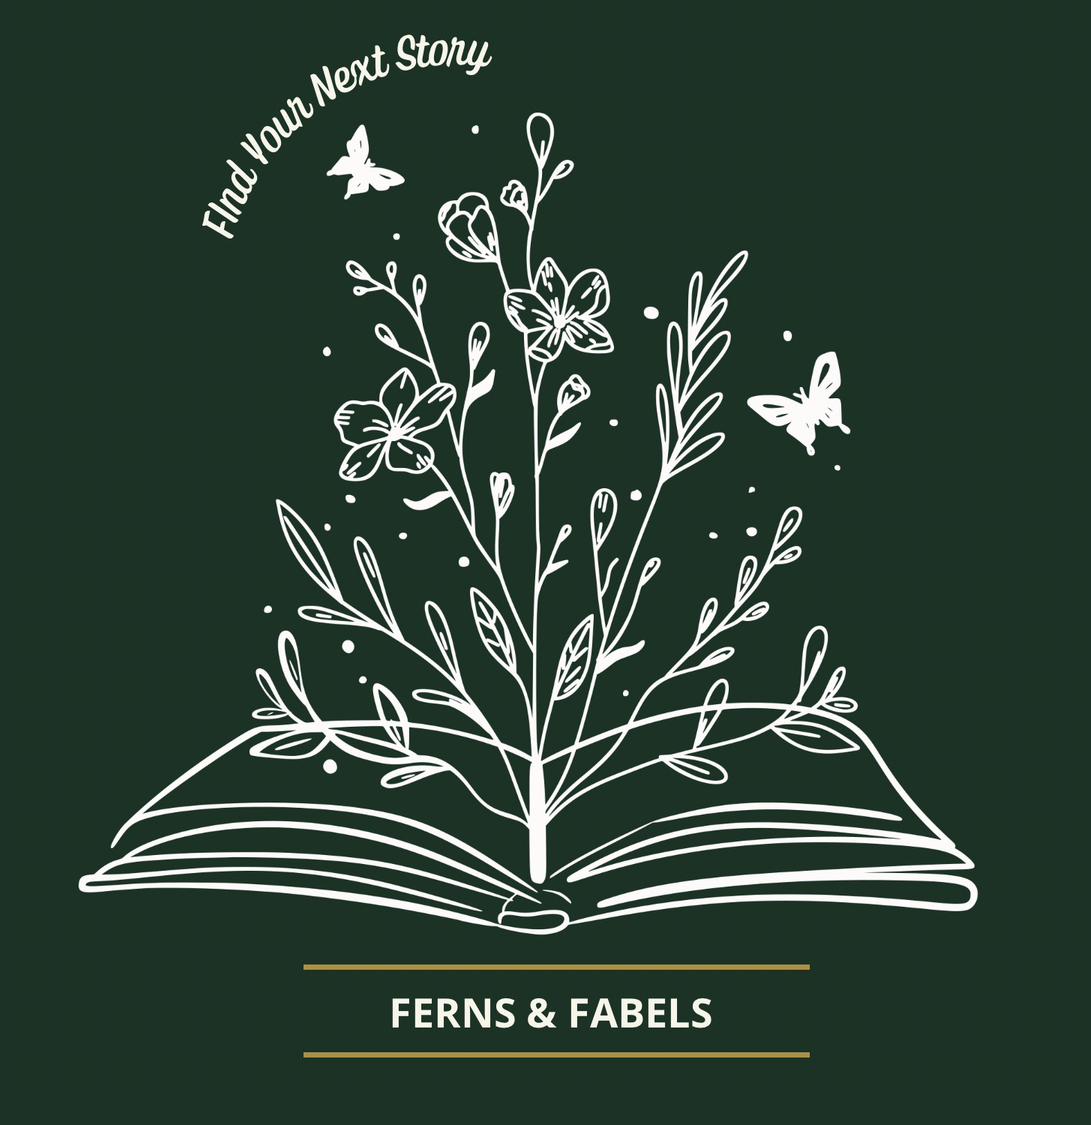 Ferns & Fables